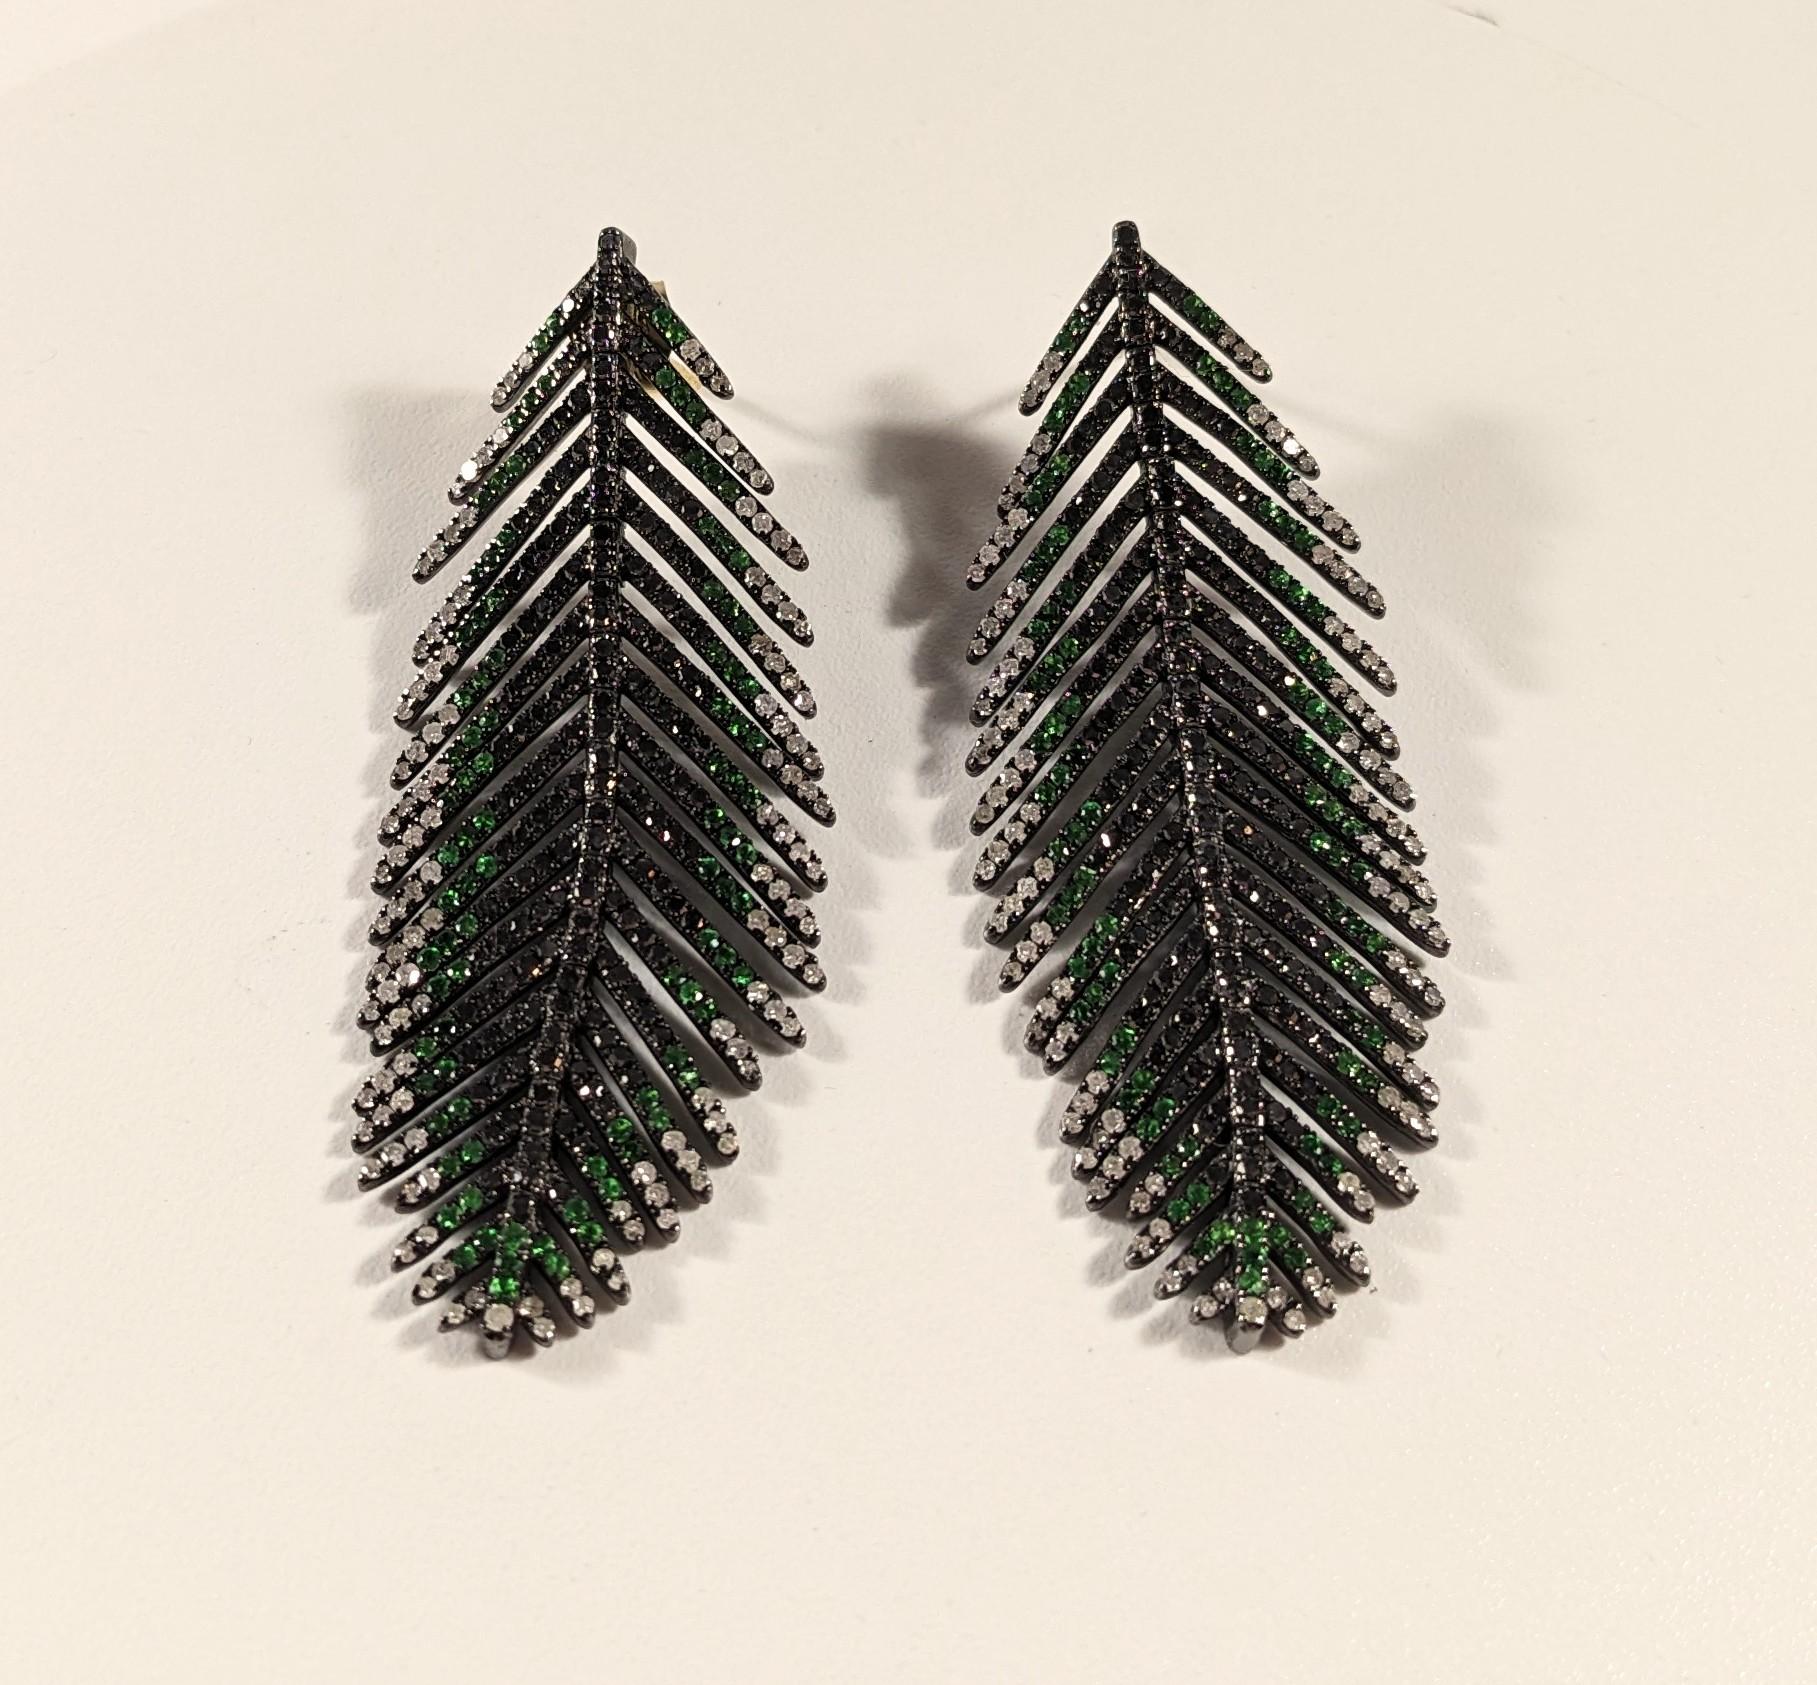 Feather Earrings in 18k  Gold, Silver, Diamonds and Tsavorites
Earrings in 18K gold weighing 0.63 g, silver 14.60 g, 594 diamonds 4.39 ct and 190 tsavorites 1.63 ct

◘ Weight 16,43 gr.
◘ Gold Weight 0,63 gr.
◘ Silver Weight 14,60 gr.
◘ Diamonds